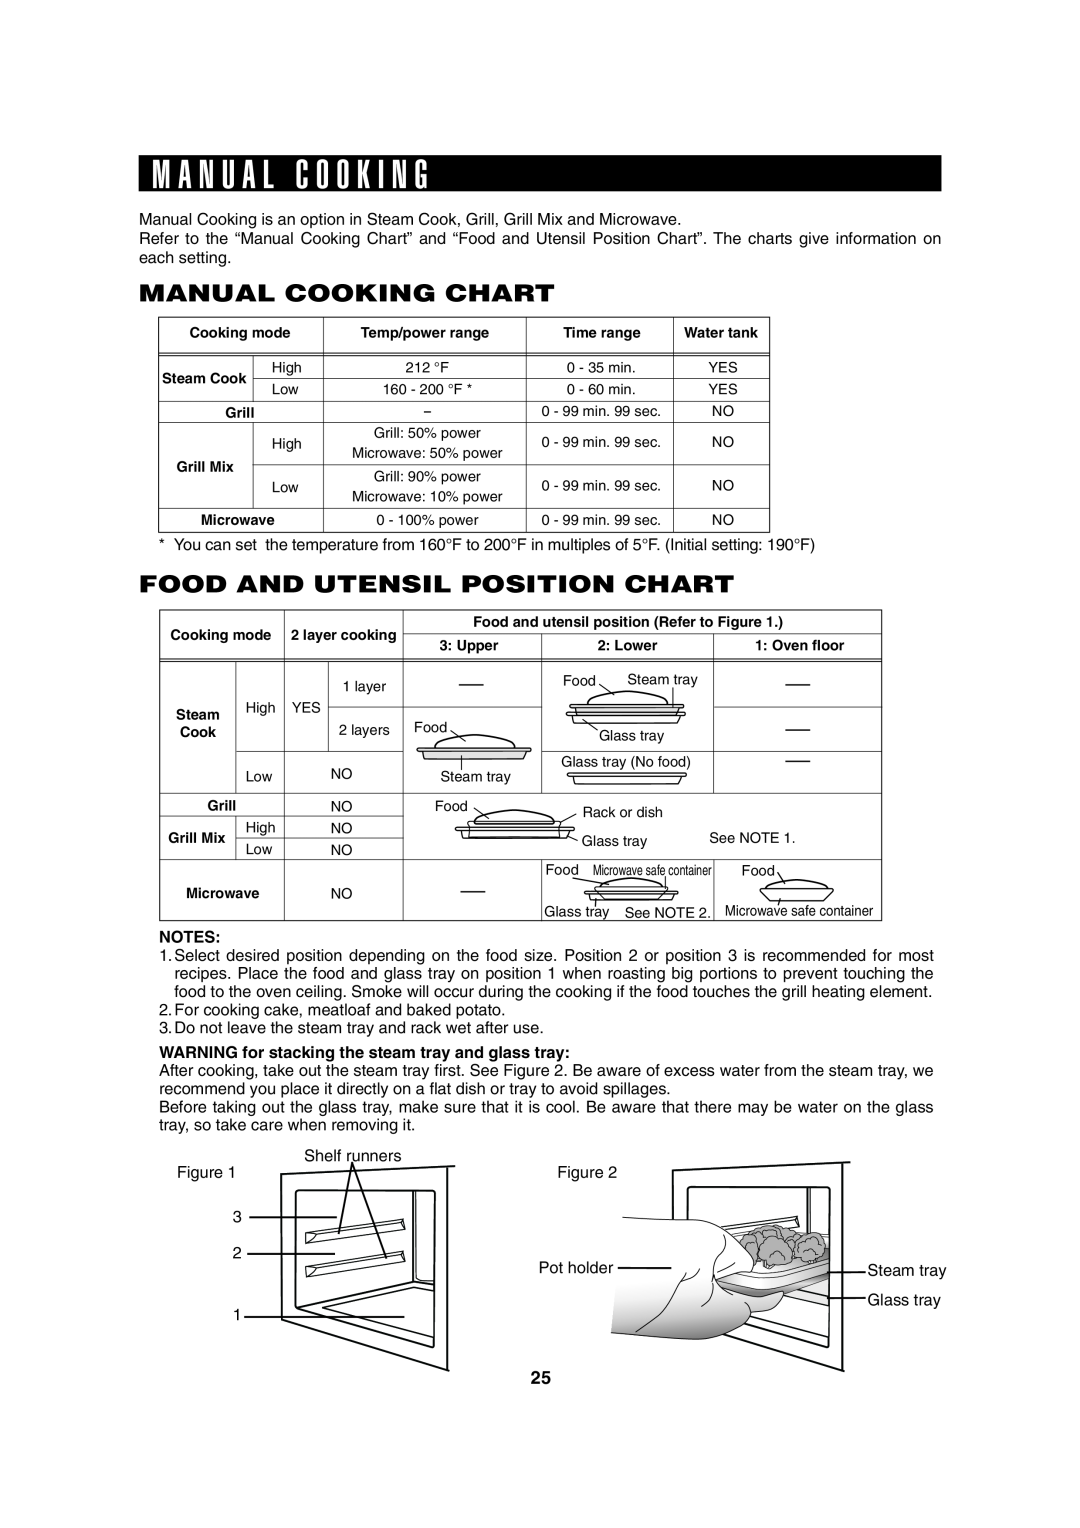 Sharp AX-1100R, AX-1100S operation manual M A N U A L C O O K I N G, Manual Cooking Chart, Food And Utensil Position Chart 